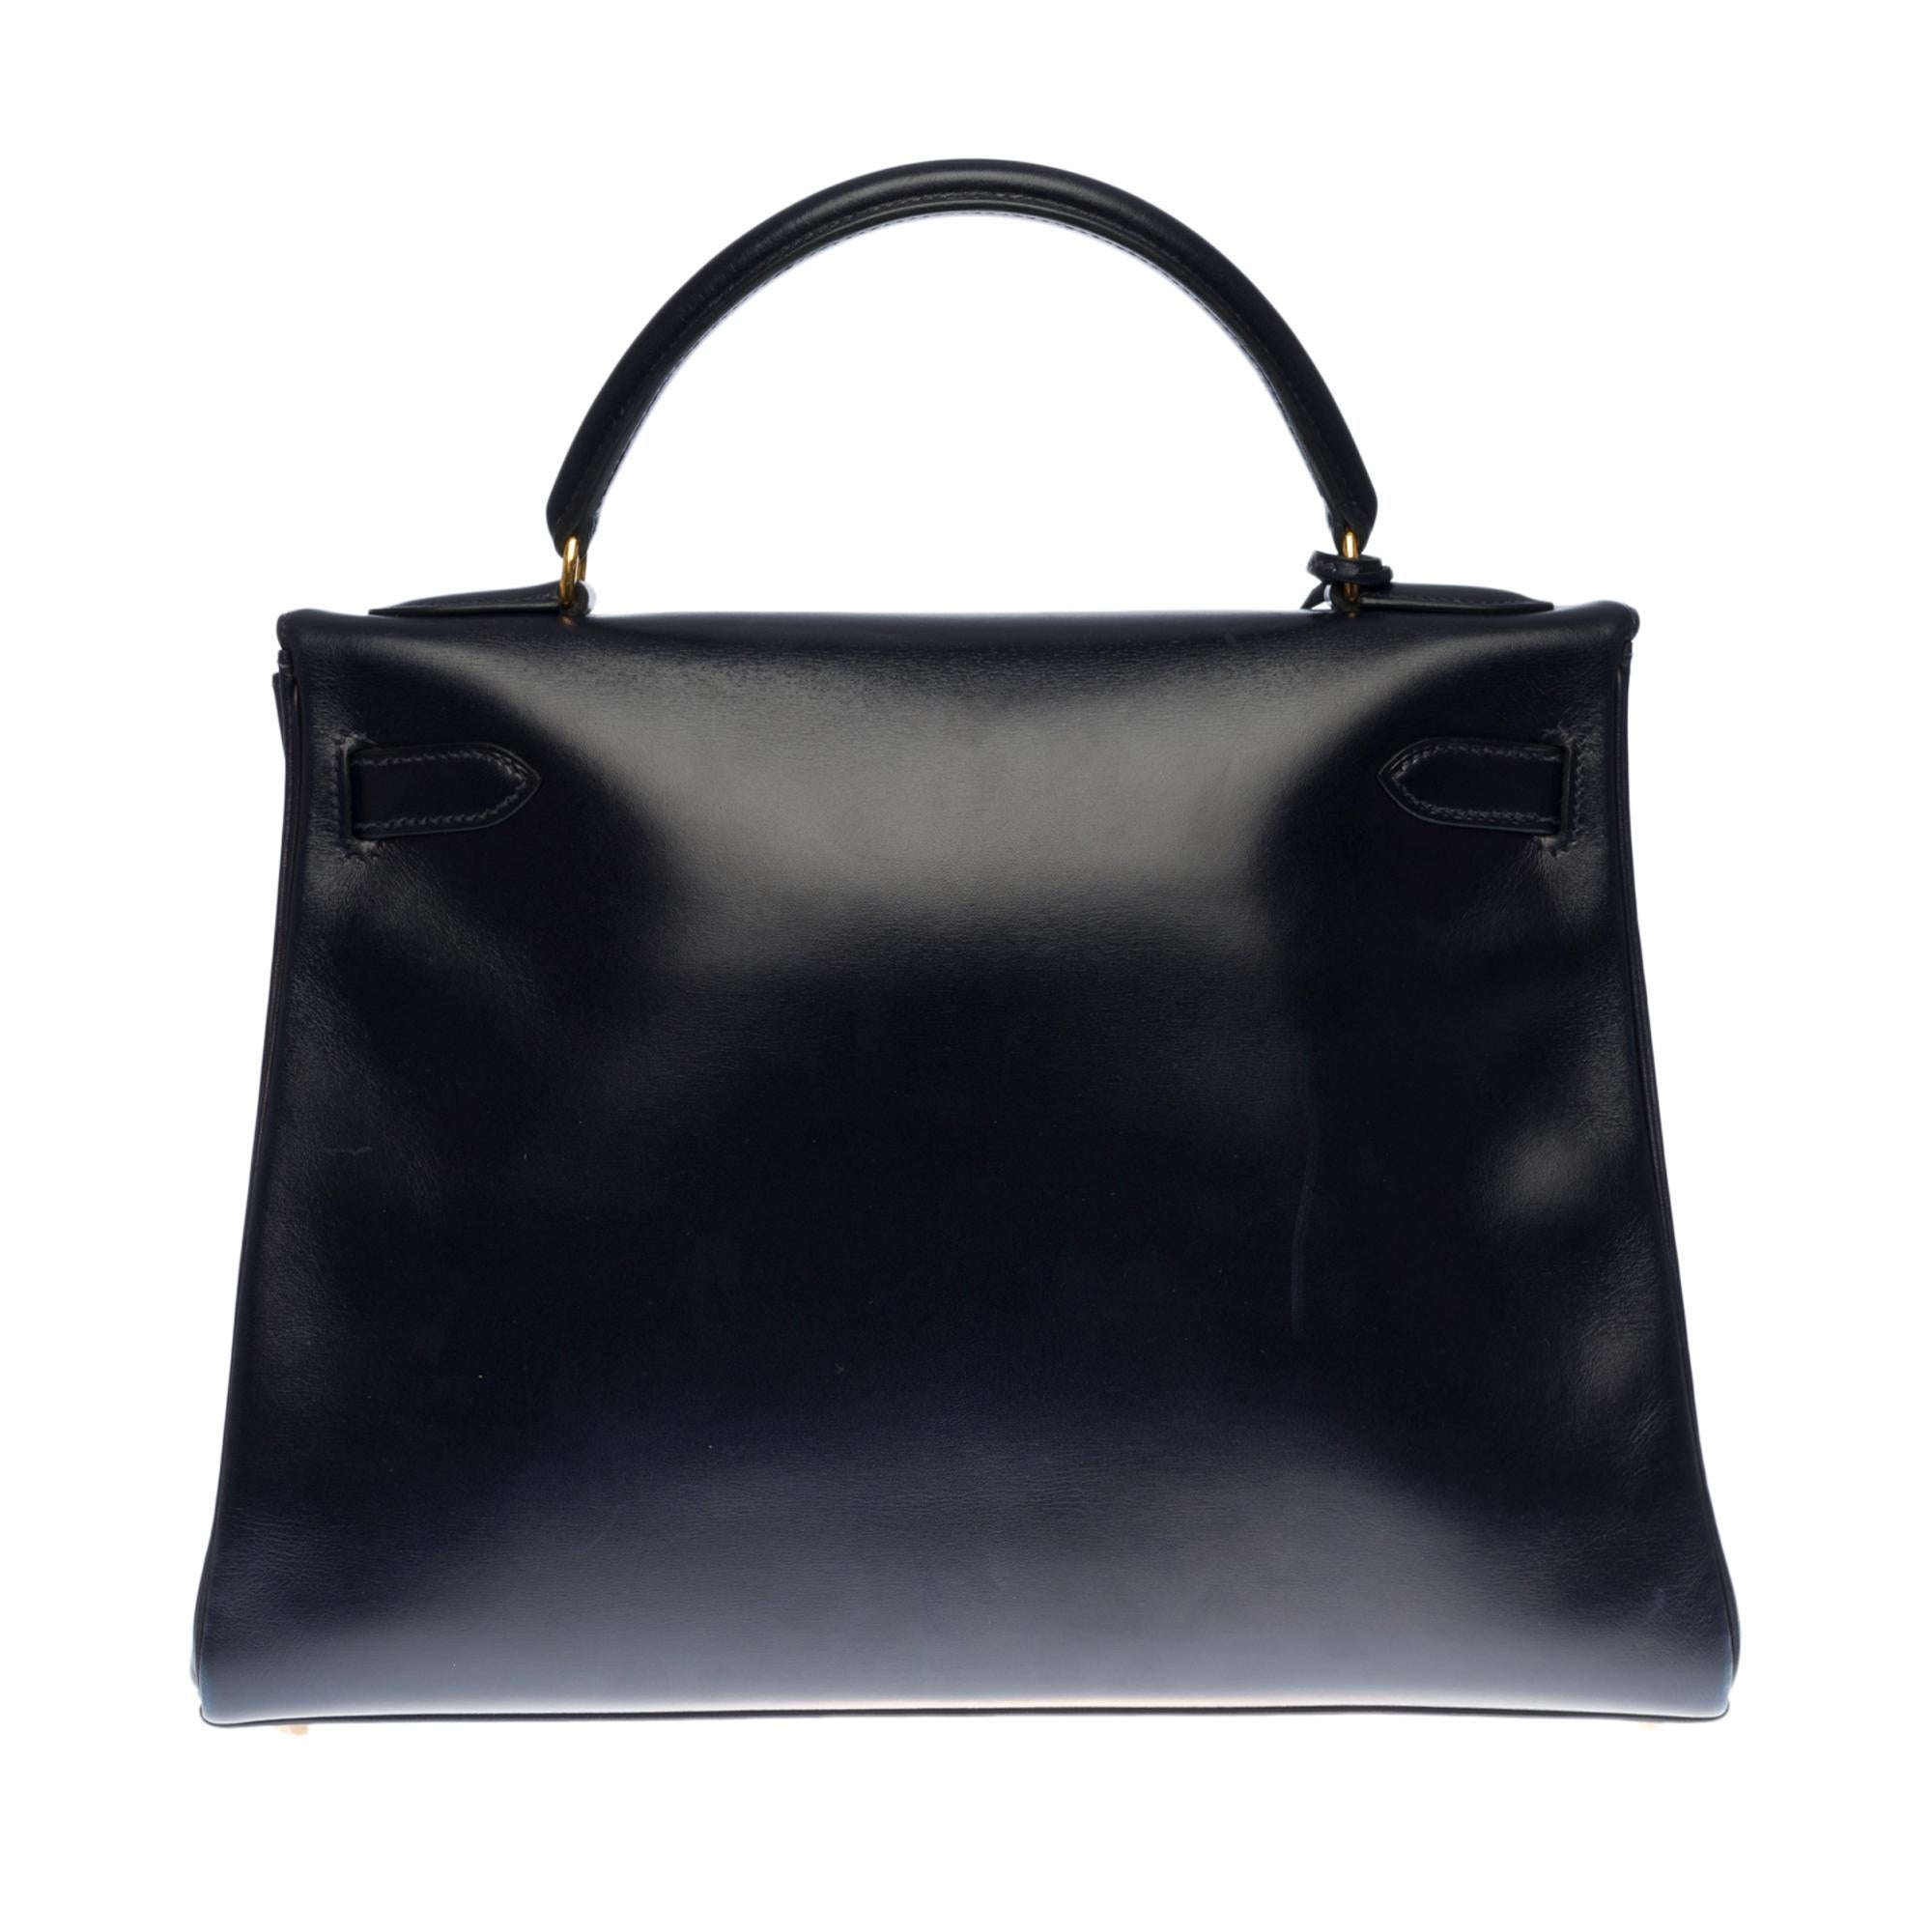 Amazing Hermes Kelly 32 retourné handbag in navy blue calf box leather, gold plated metal hardware, navy blue calf leather handle, removable, navy blue strap allowing hand or shoulder carrying
 
Flap closure
Navy leather interior lining
One zipped